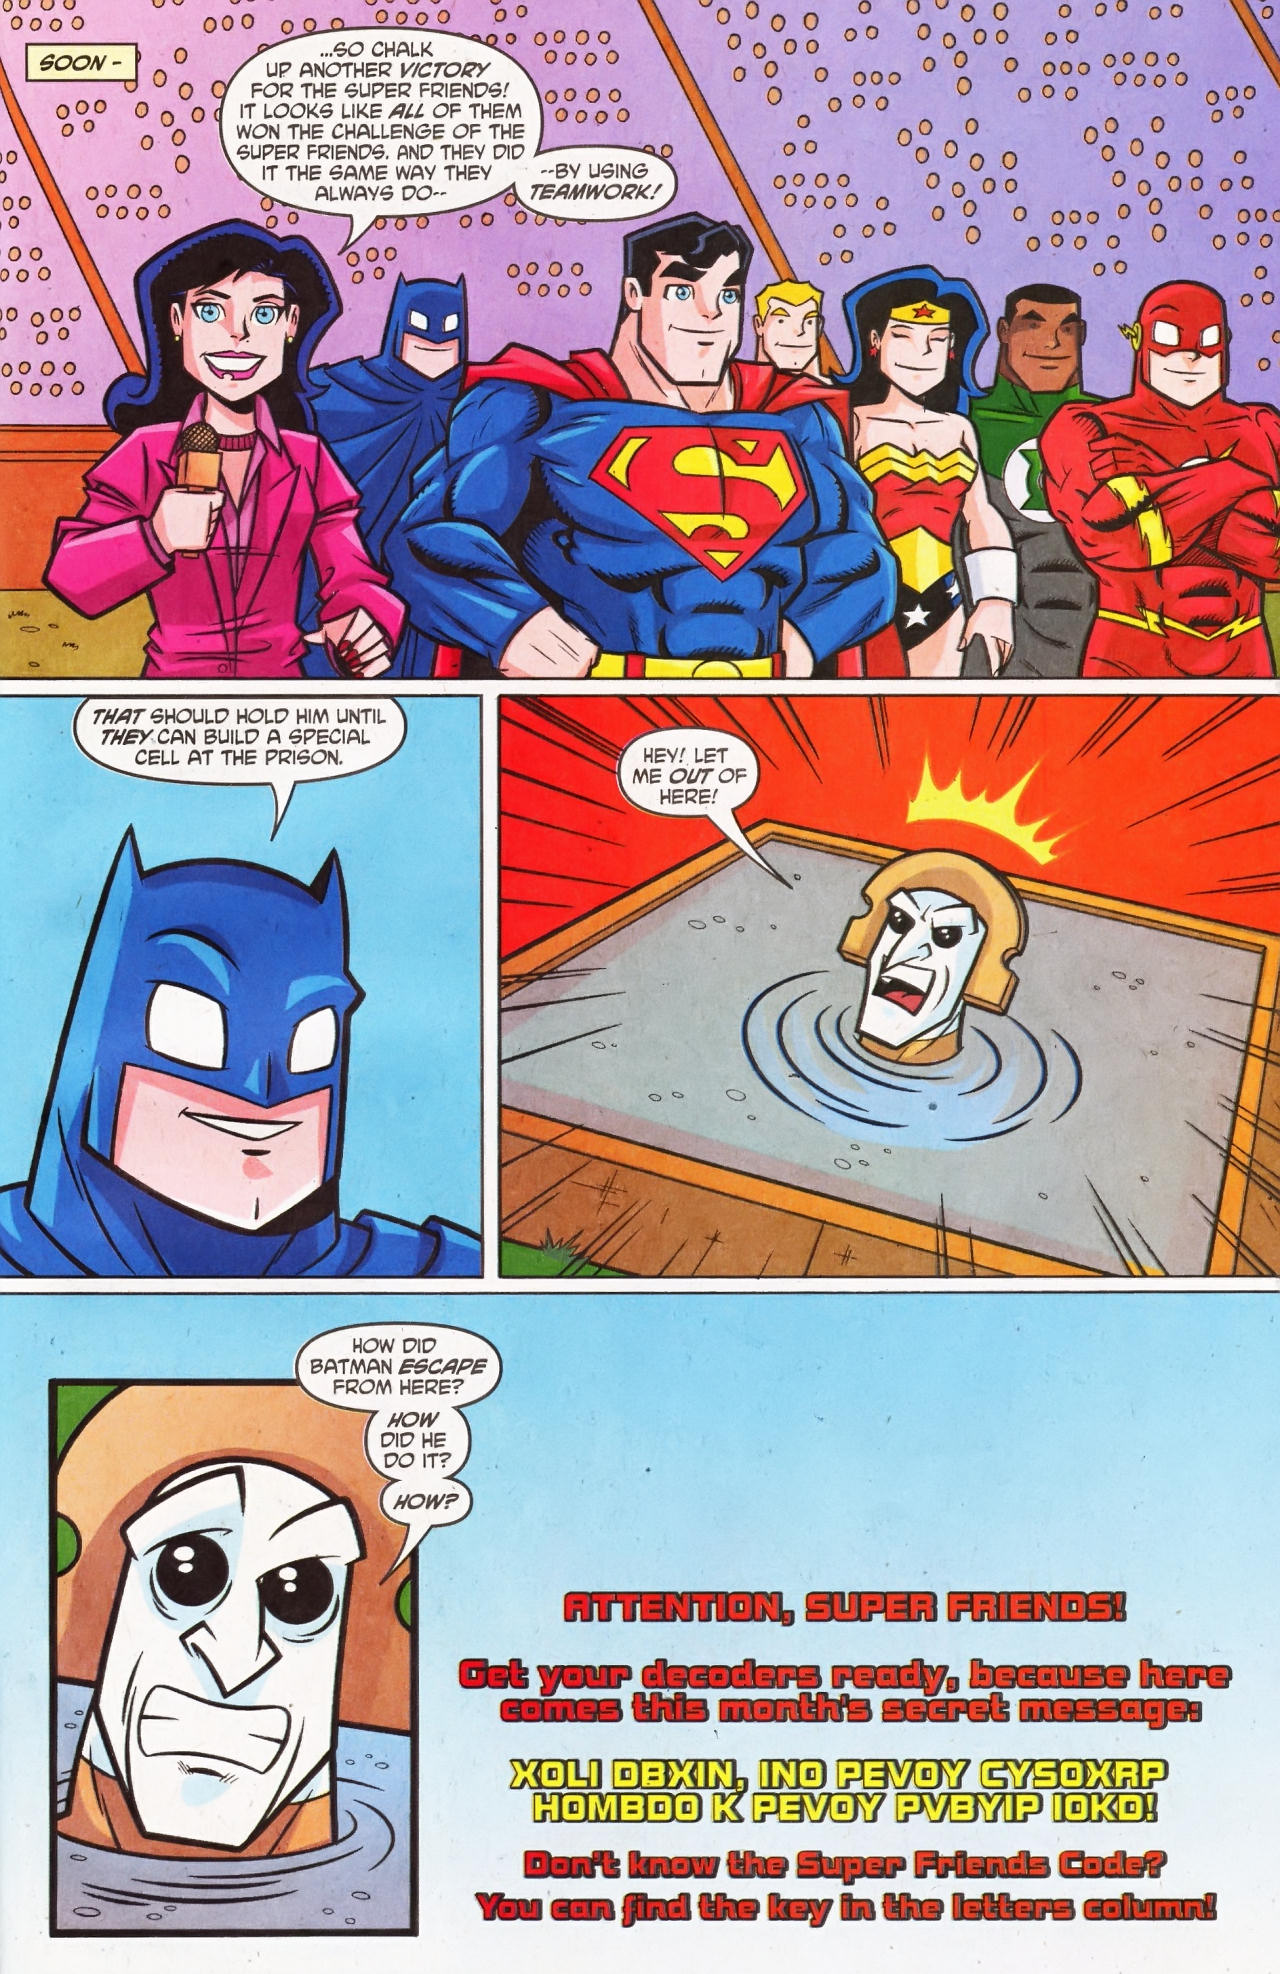 Read online Super Friends comic -  Issue #6 - 31